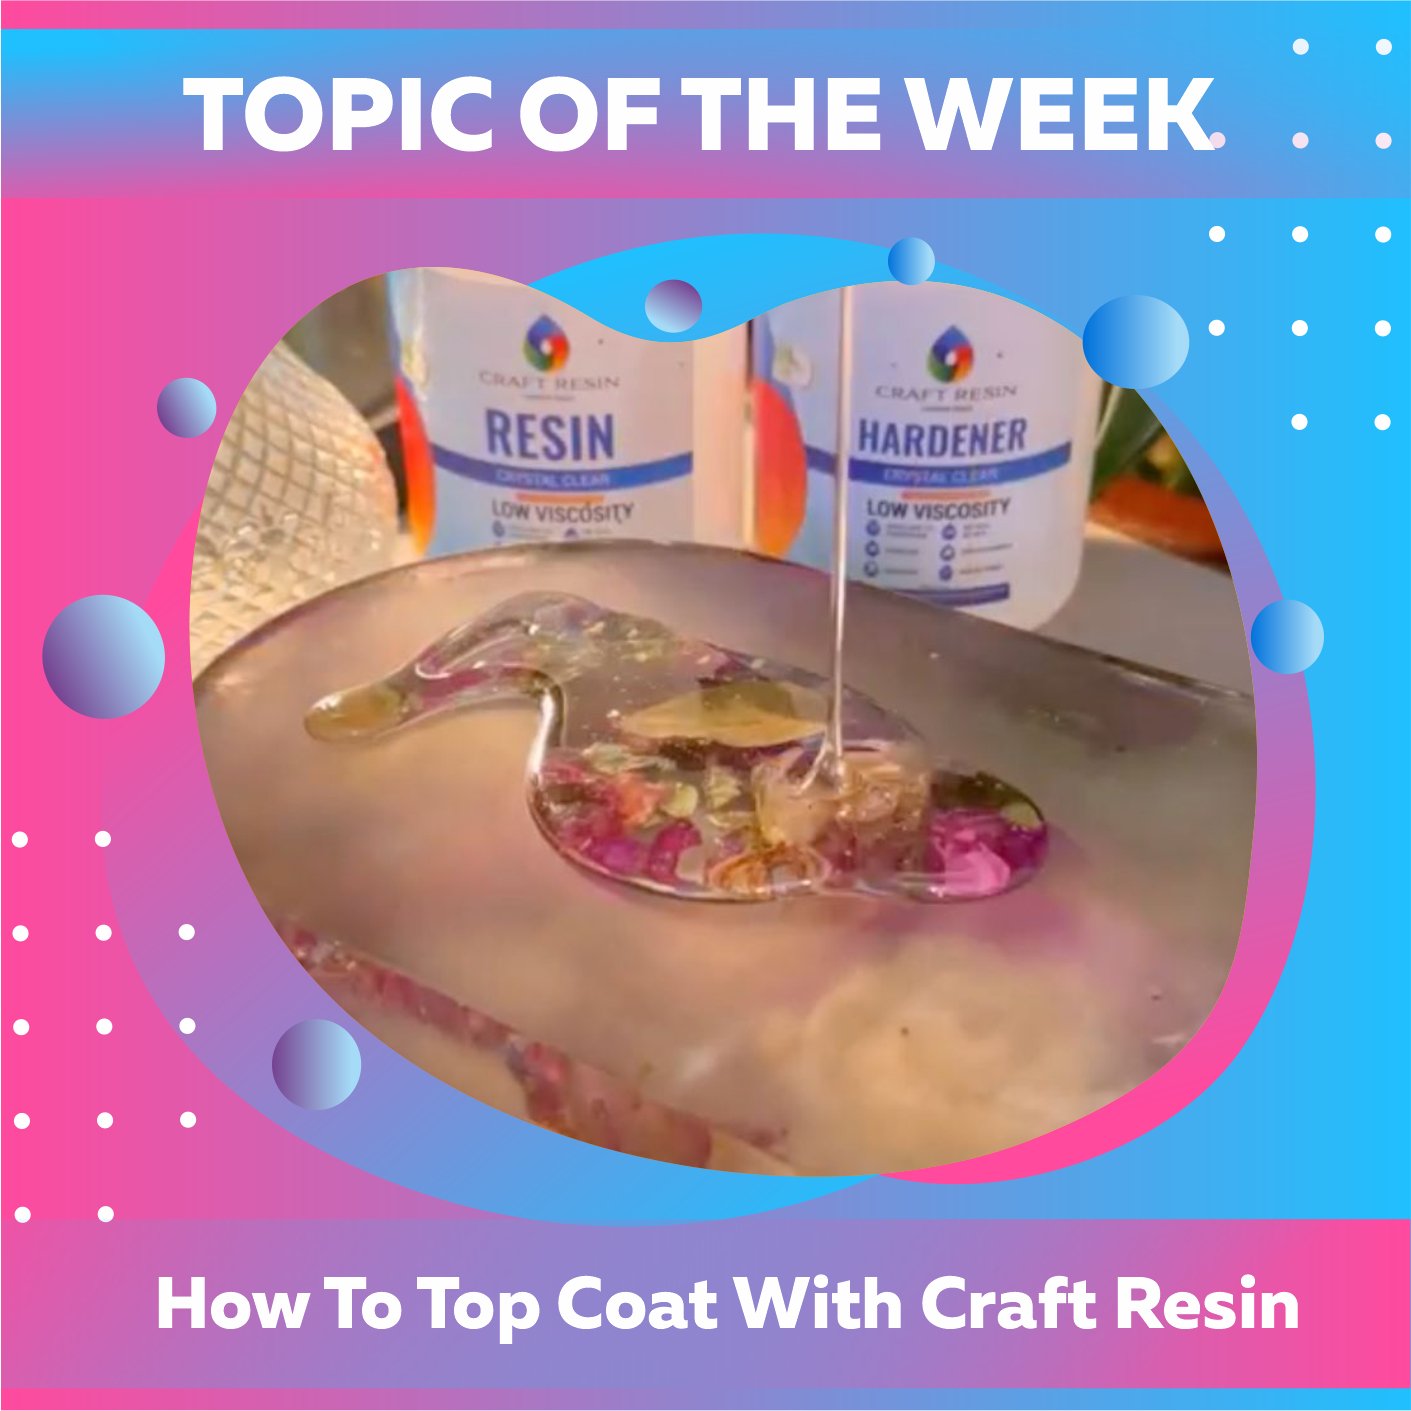 How To Top Coat With Craft Resin - Craft Resin